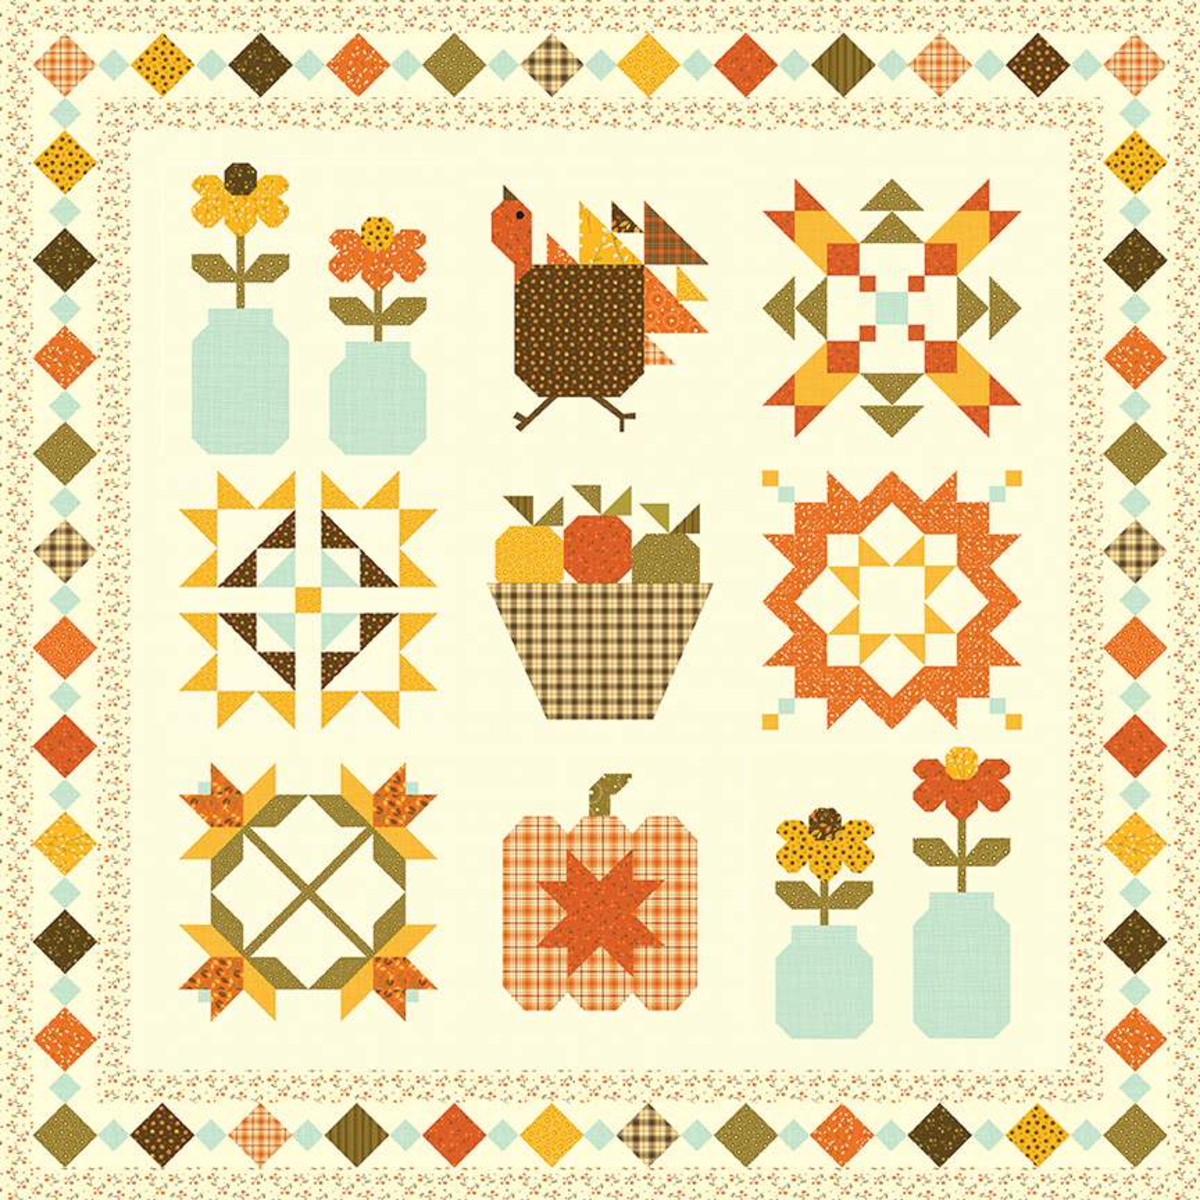 FALL AGTHERINGS Sampler Quilt Boxed Kit by SANDI GERVAIS